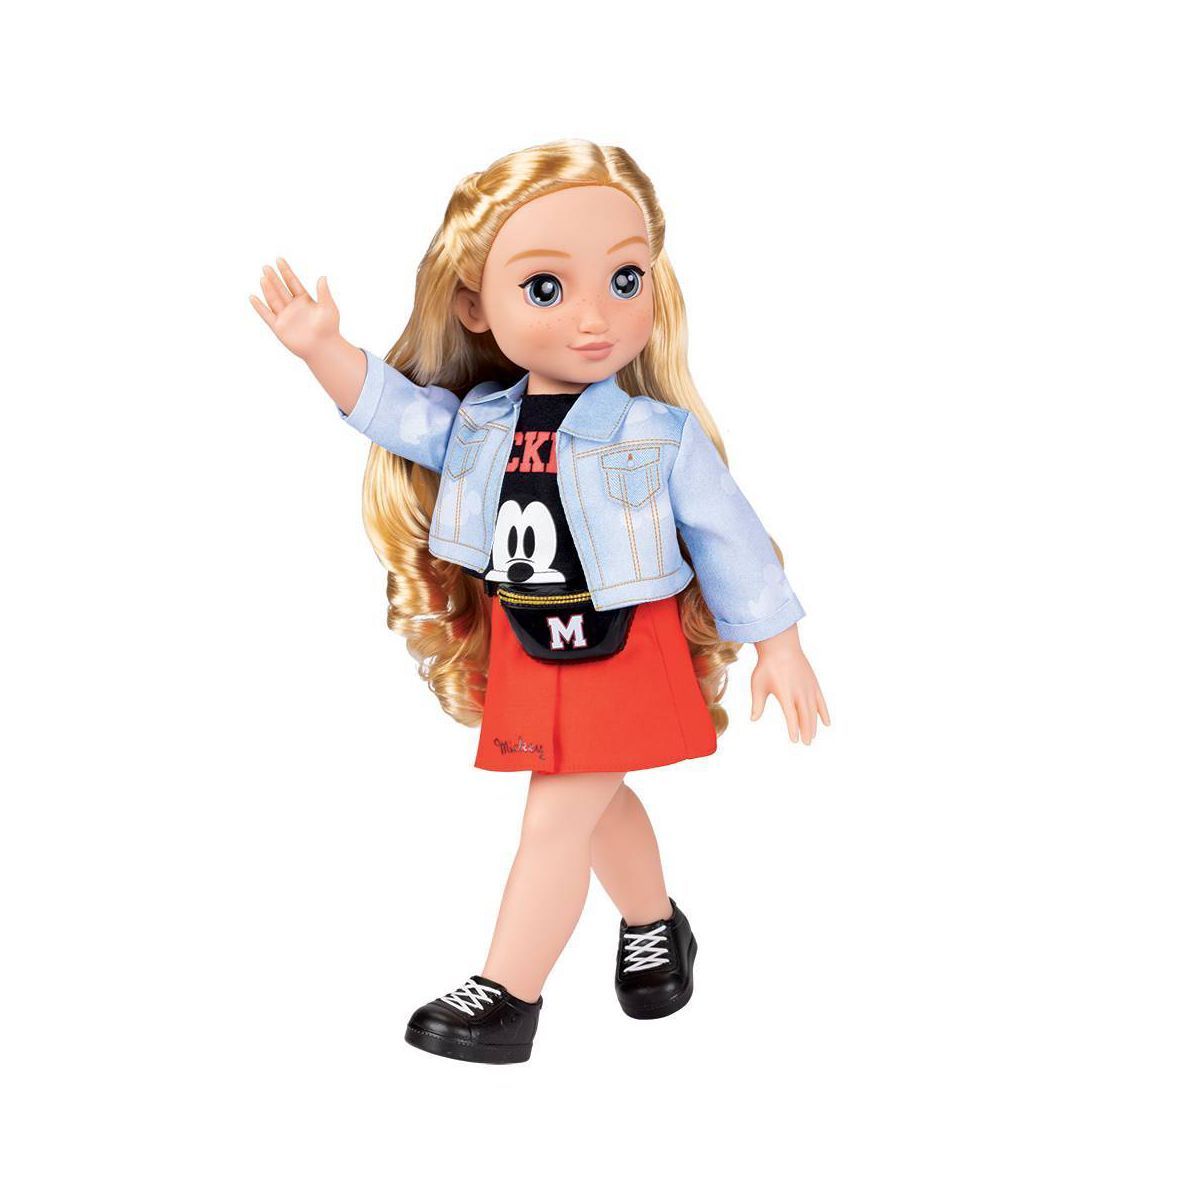 Disney ily 4EVER Inspired 18" by Mickey Mouse Blonde Doll | Target